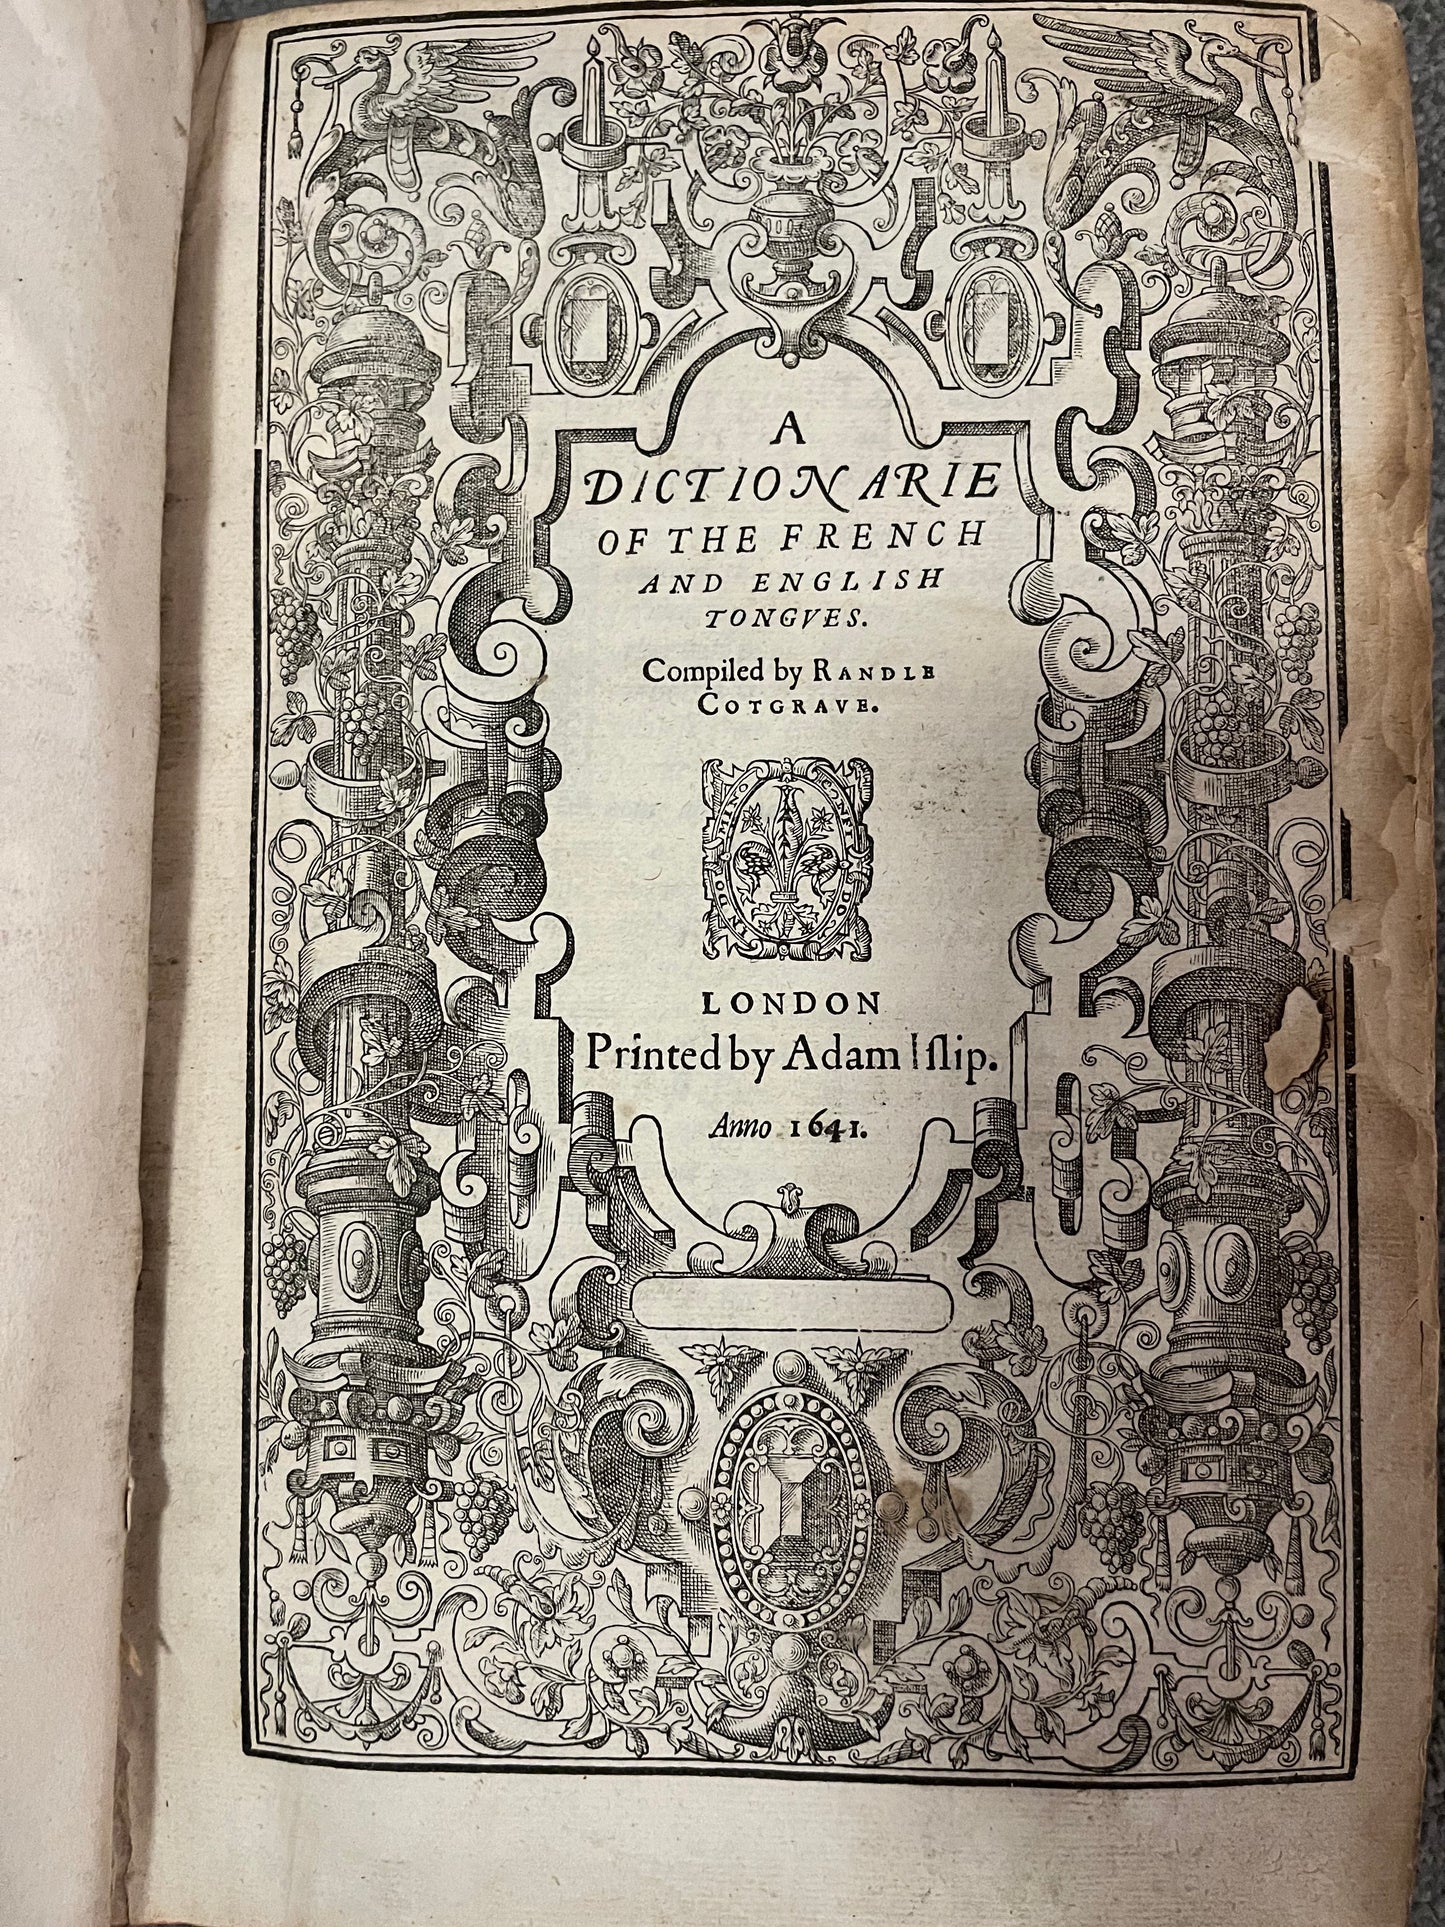 First French - English Dictionary in Original Binding - 1611 - Cotgrave's "A Dictionarie of the French and English Tongues"